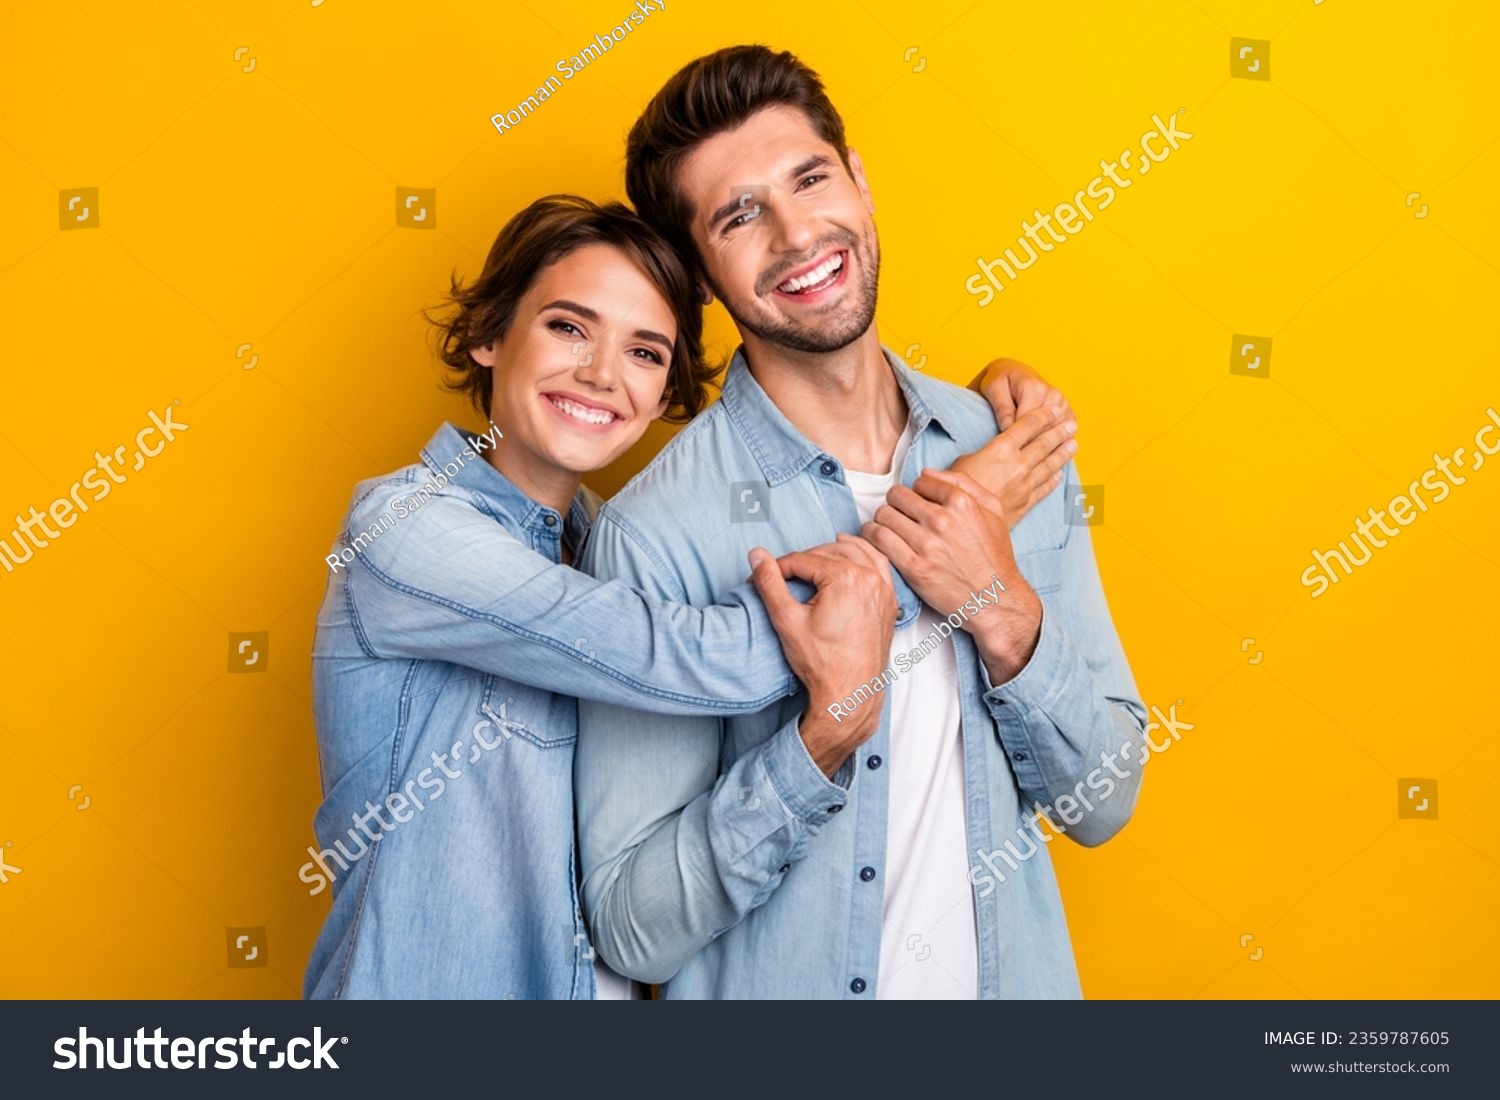 Photo of perfect family lady guy cuddle enjoy romantic date together isolated shine color background #2359787605